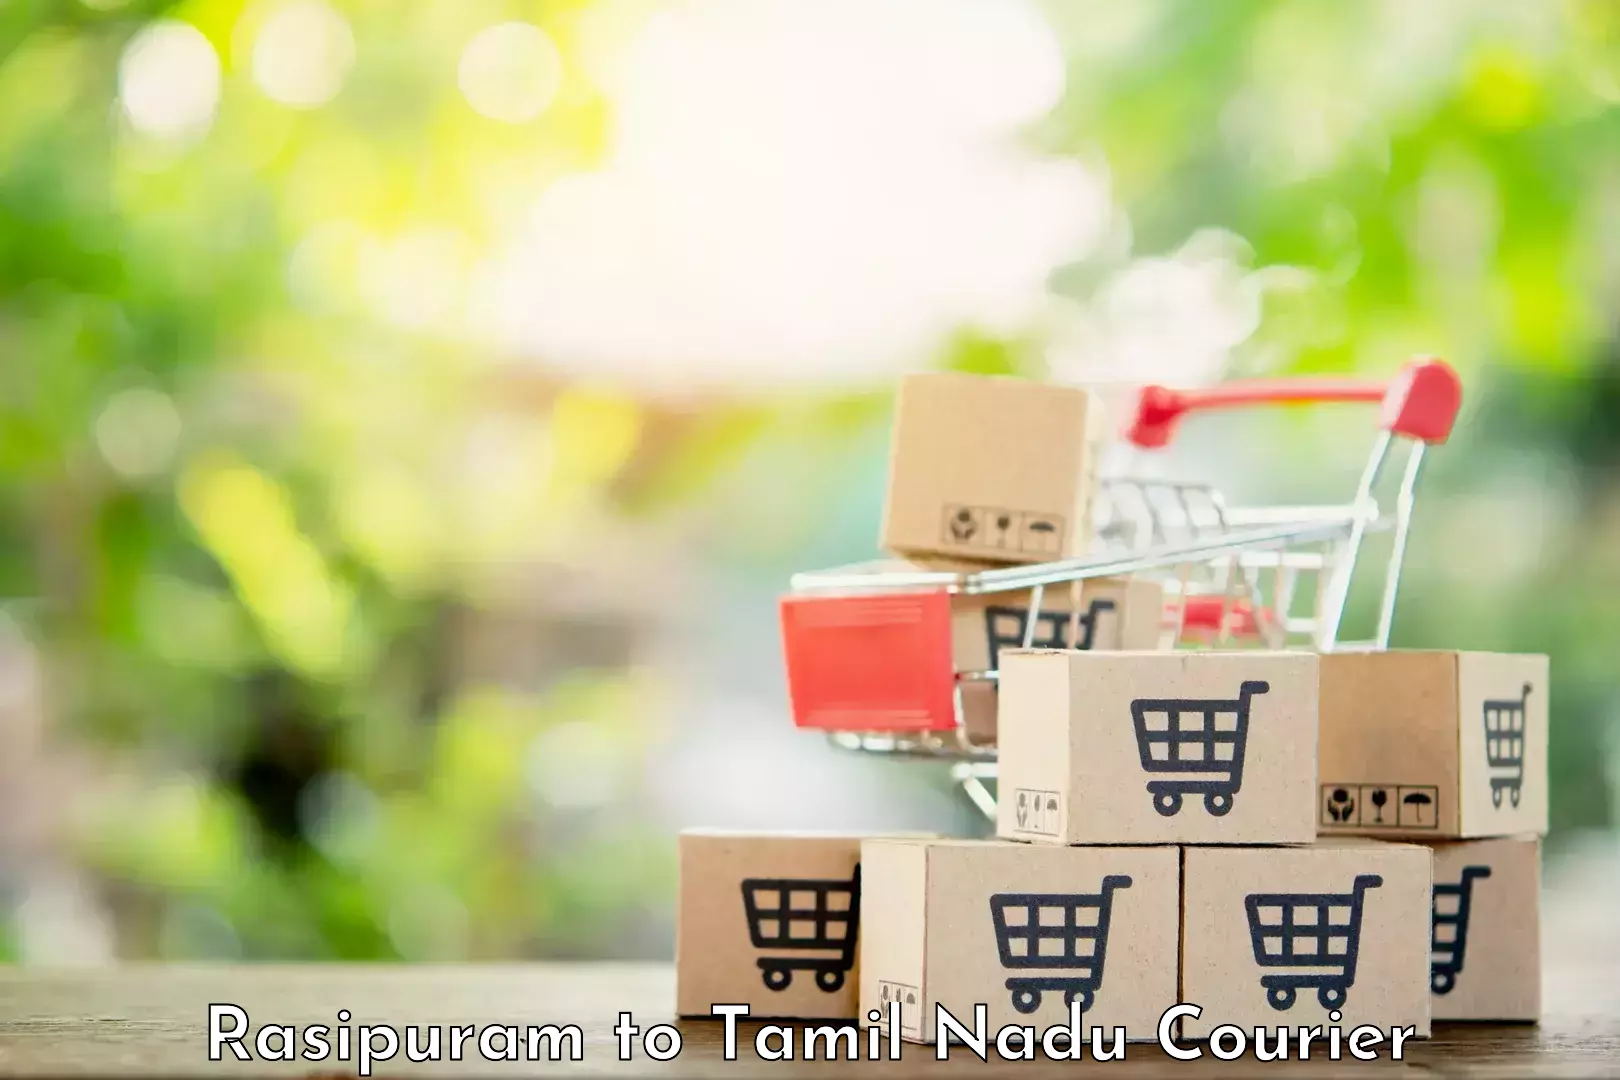 Professional delivery solutions in Rasipuram to Tamil Nadu